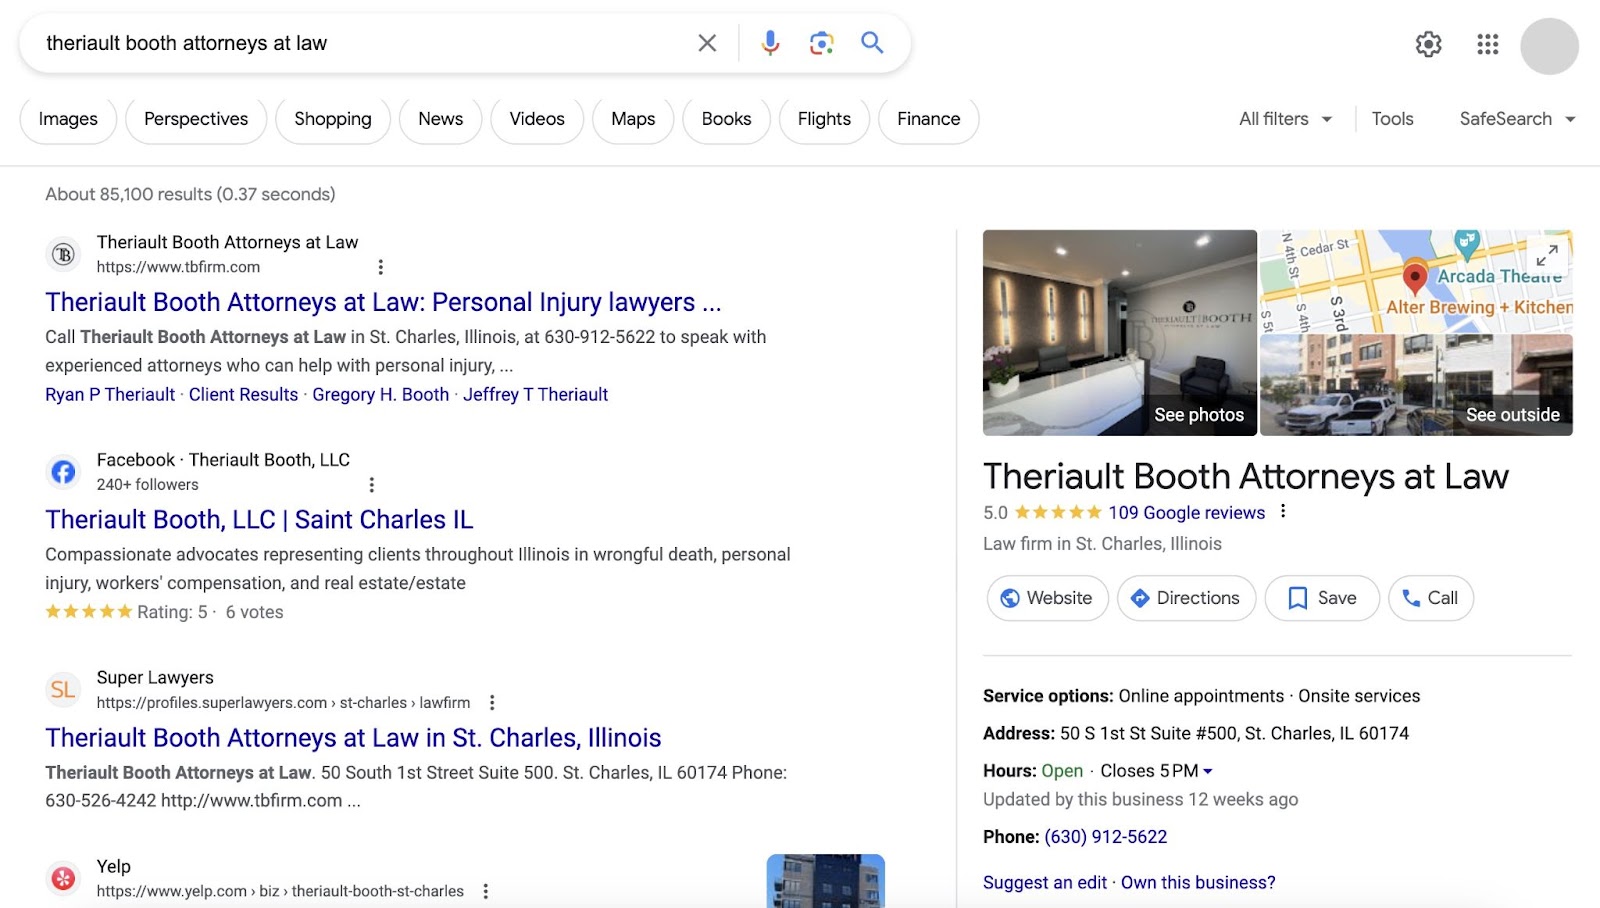 Google's results for "thelault booth attorneys astatine  law"